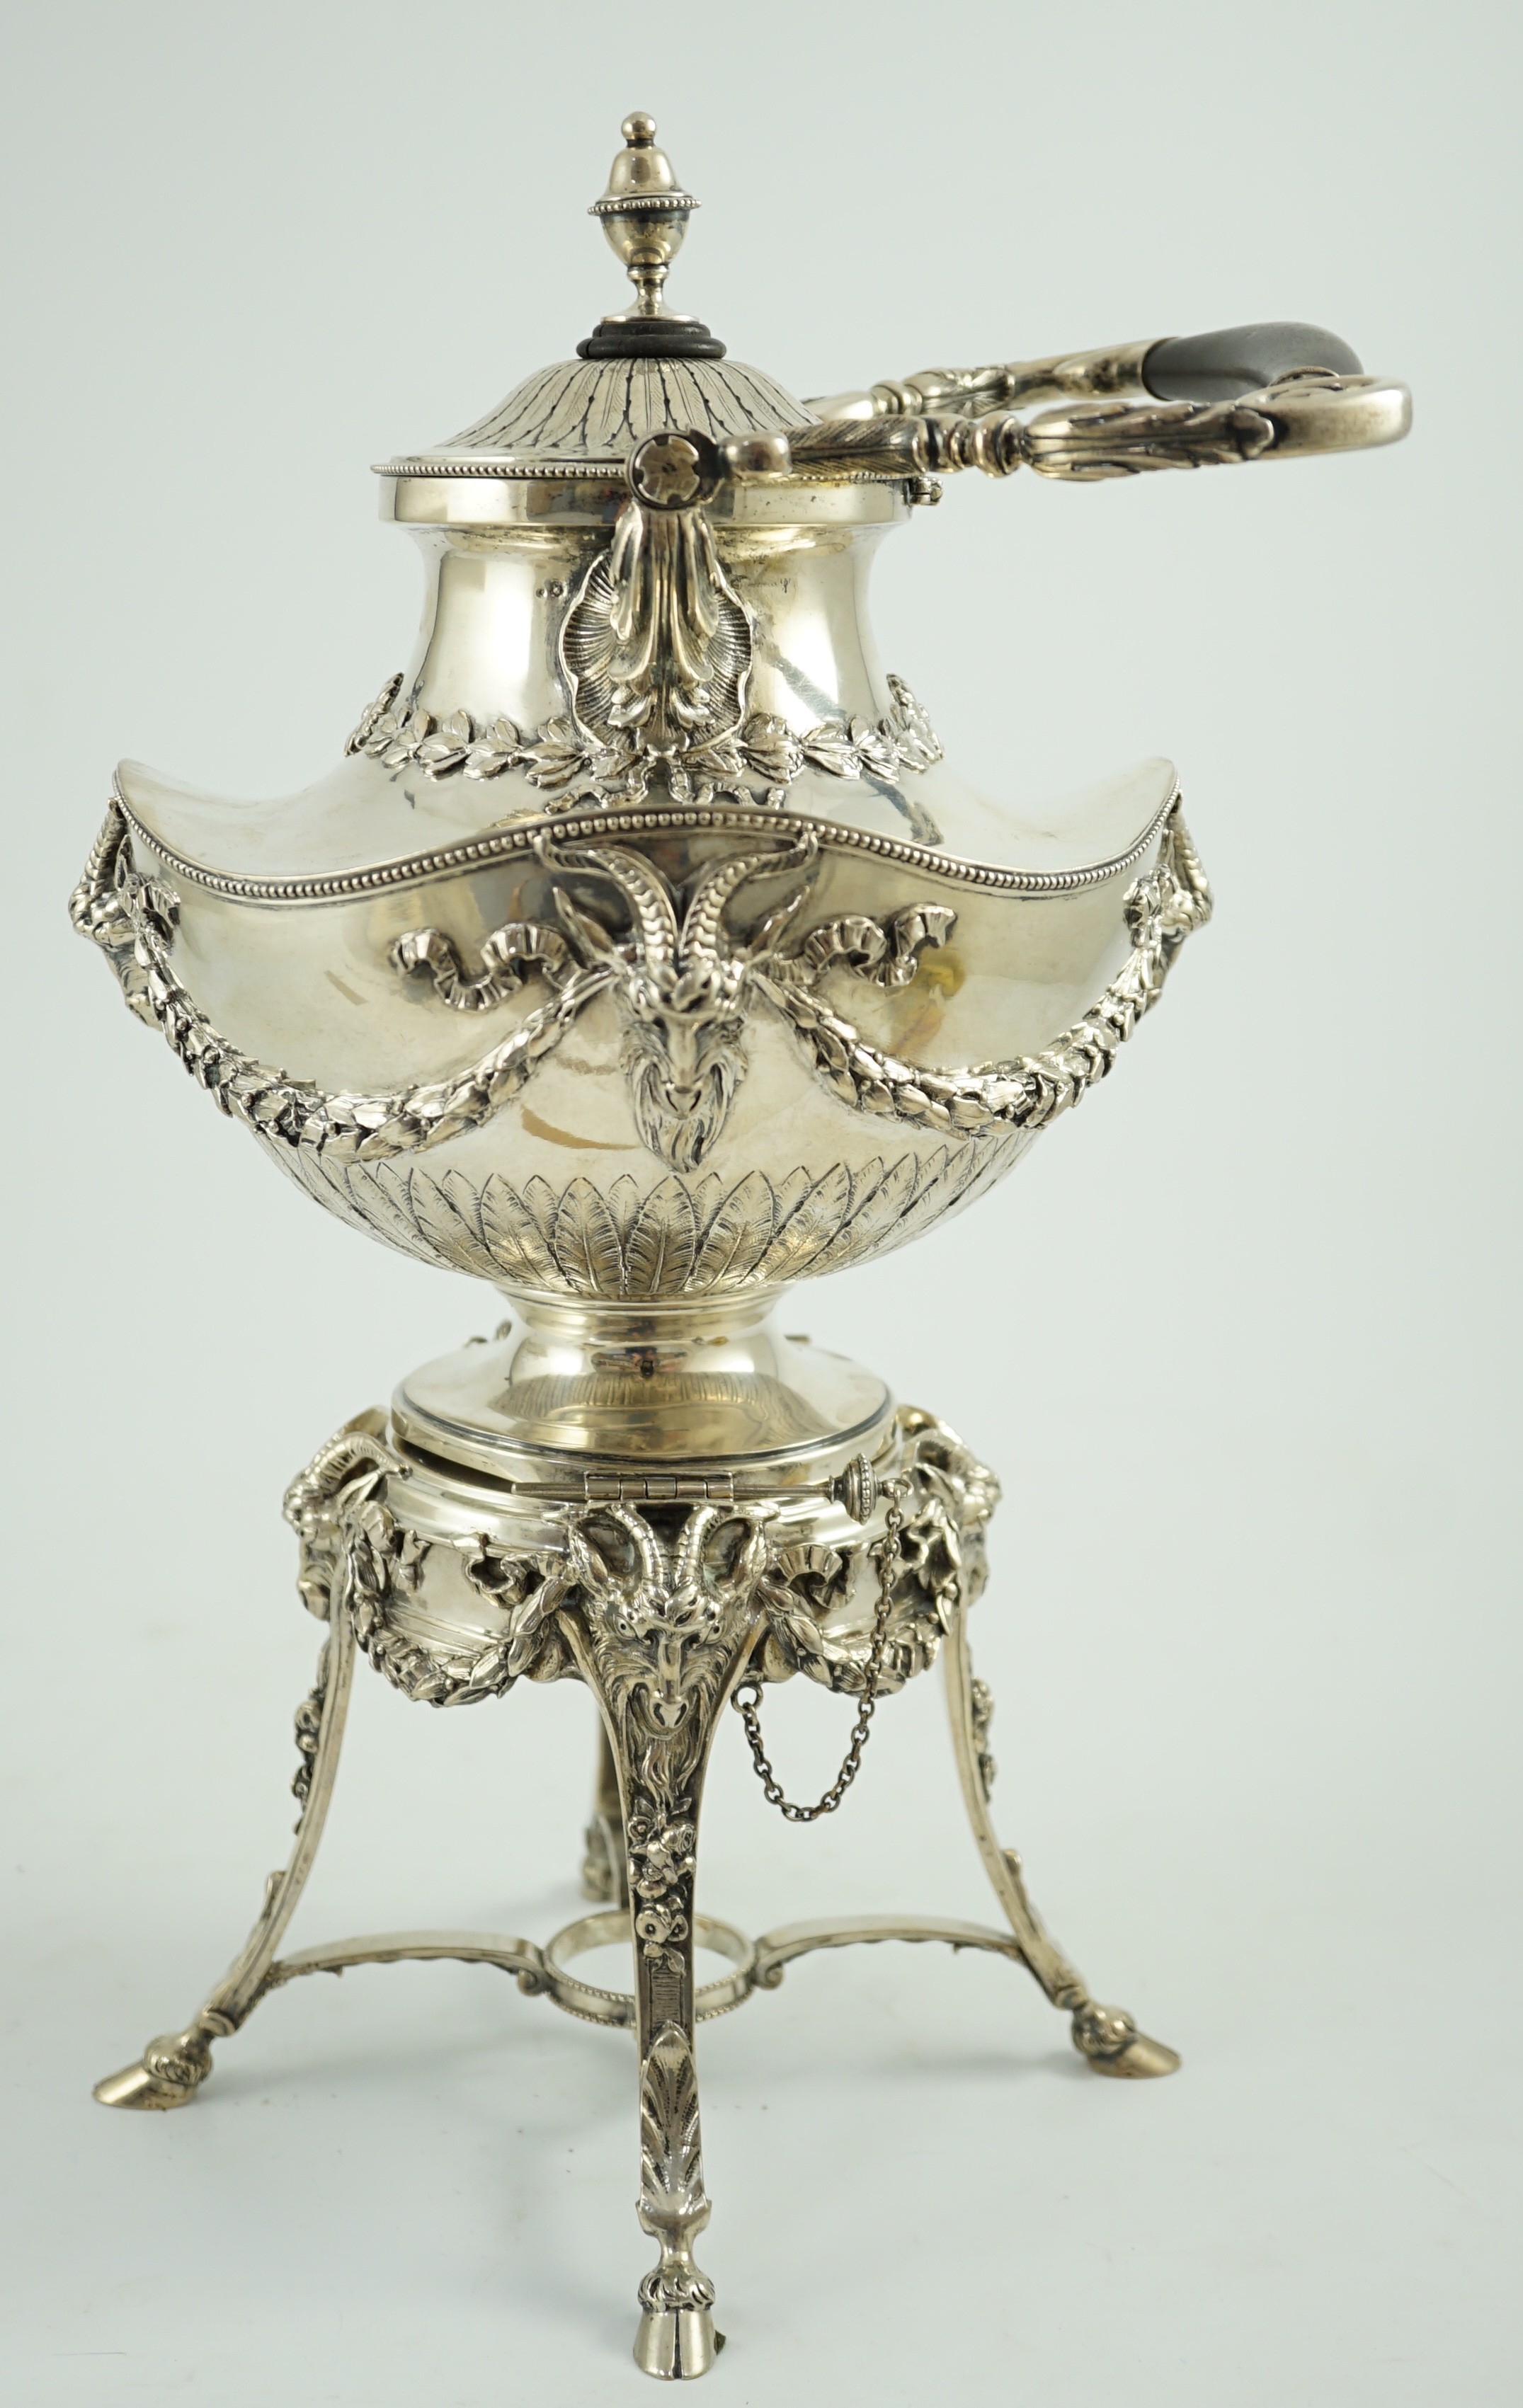 An ornate late 19th/early 20th century Austro-Hungarian 800 standard silver tea kettle on stand, - Image 5 of 5